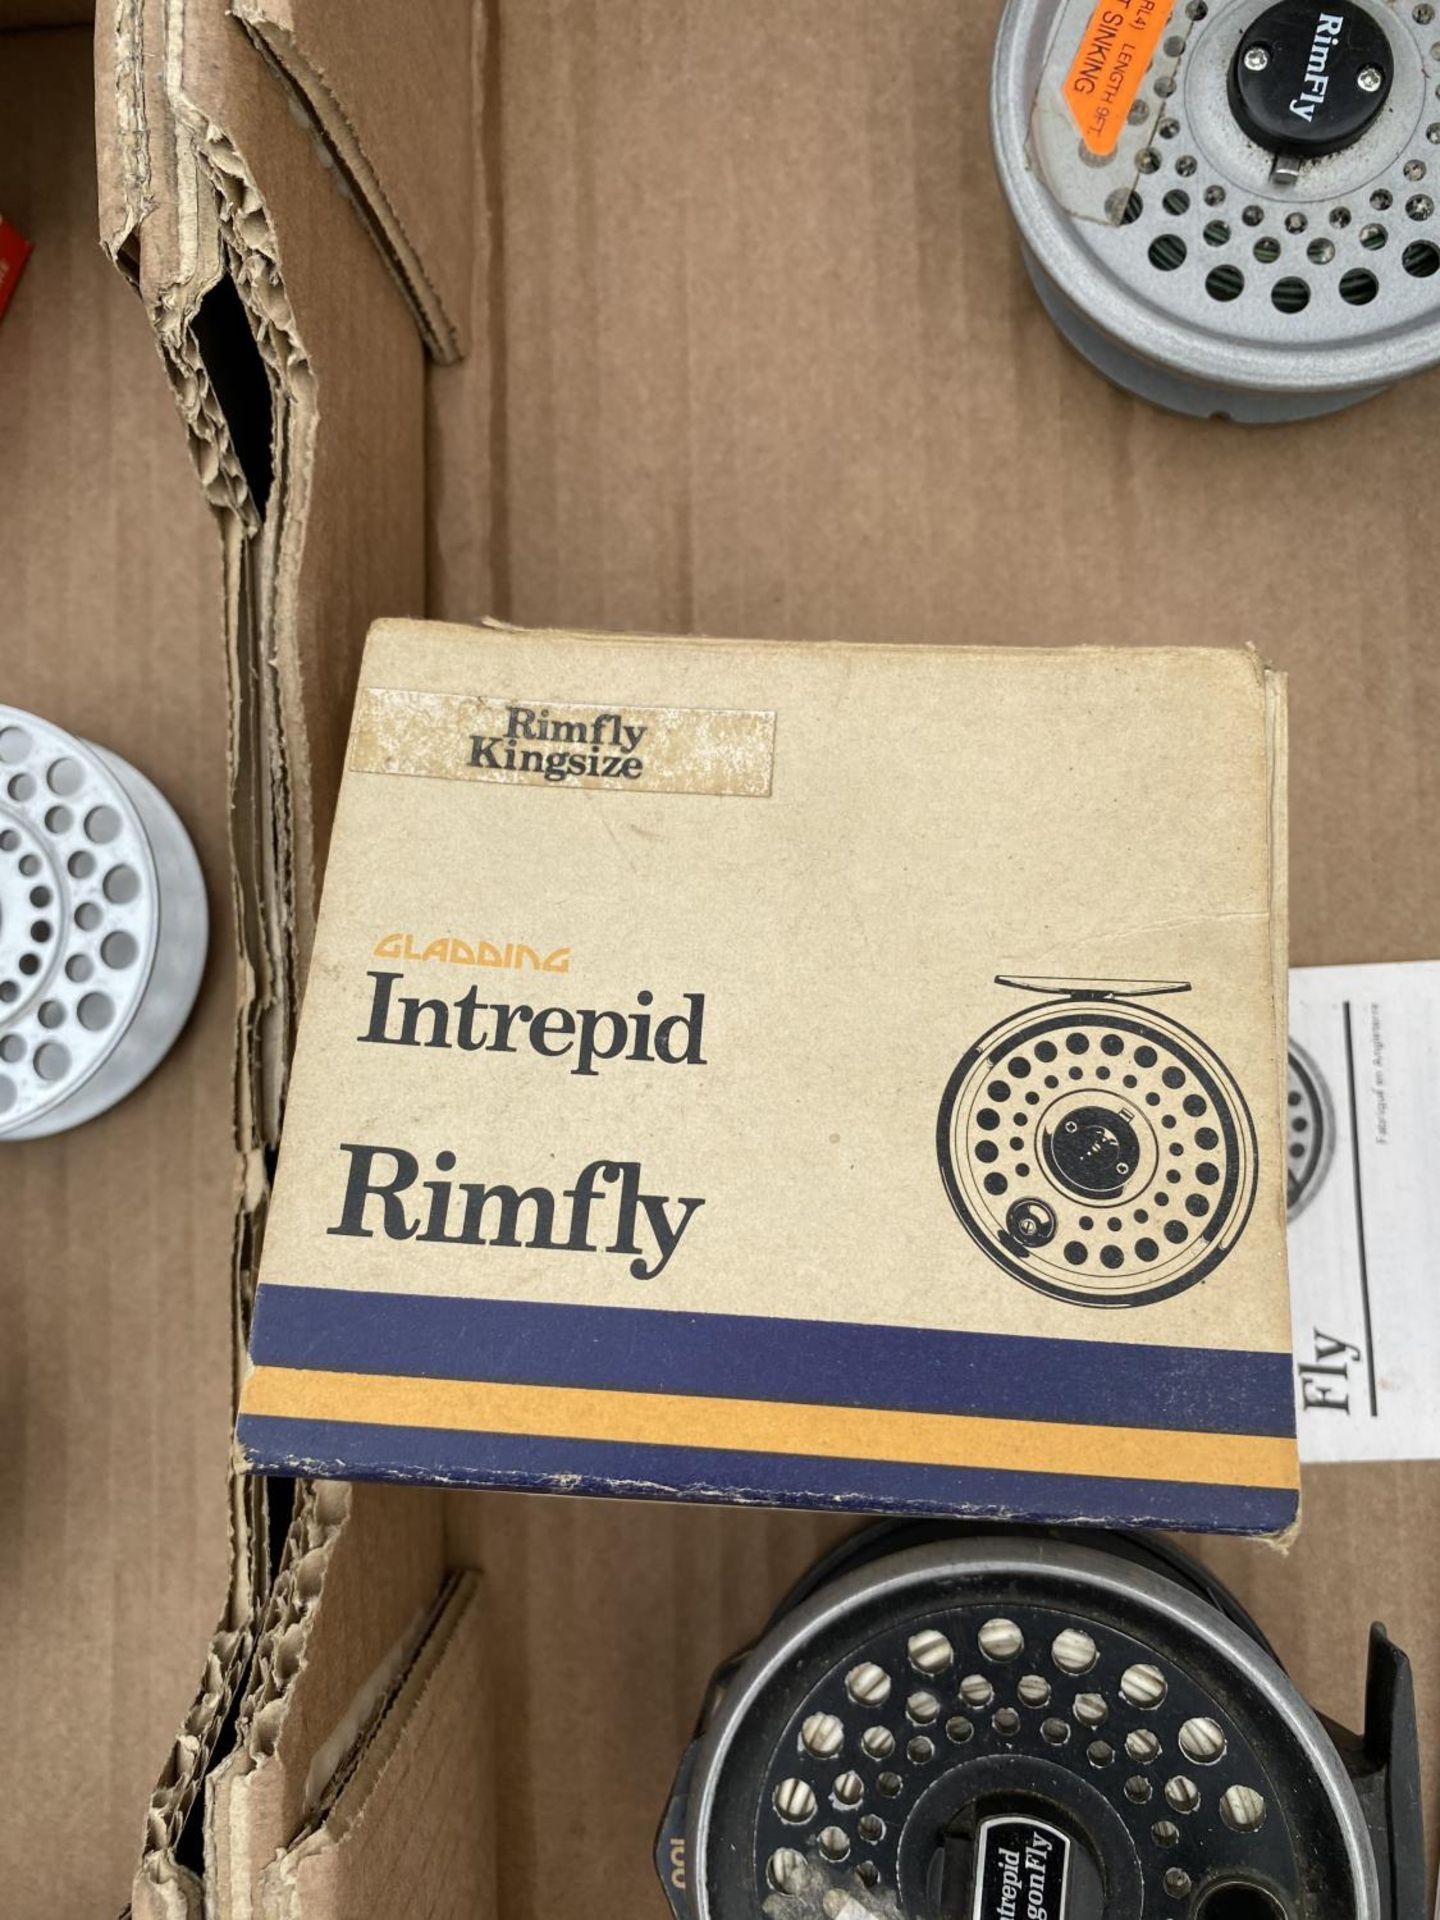 TWO DRAGONFLY FLY FISHING REELS, A REGULAR RIMFLY REEL AND A KINGSIZE RIMFLY REEL AND SPARE SPOOL - Image 2 of 5